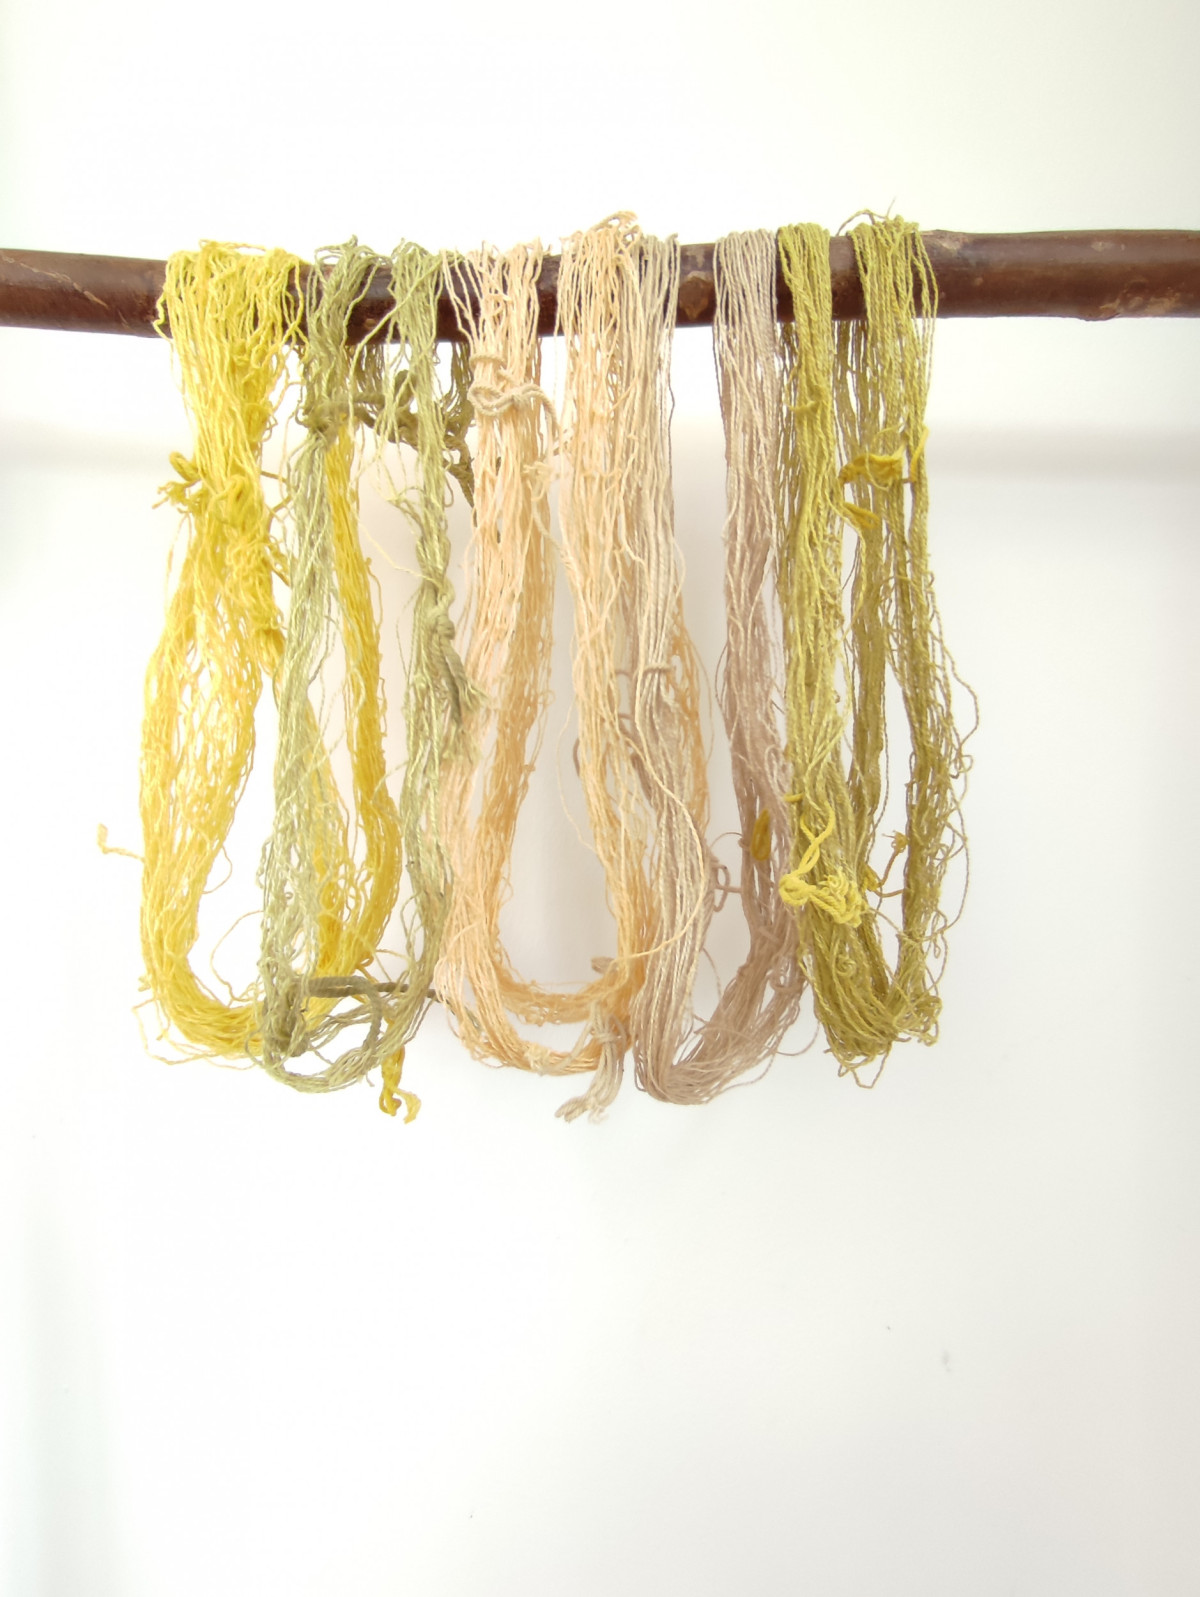 Naturally dyed linen hanks